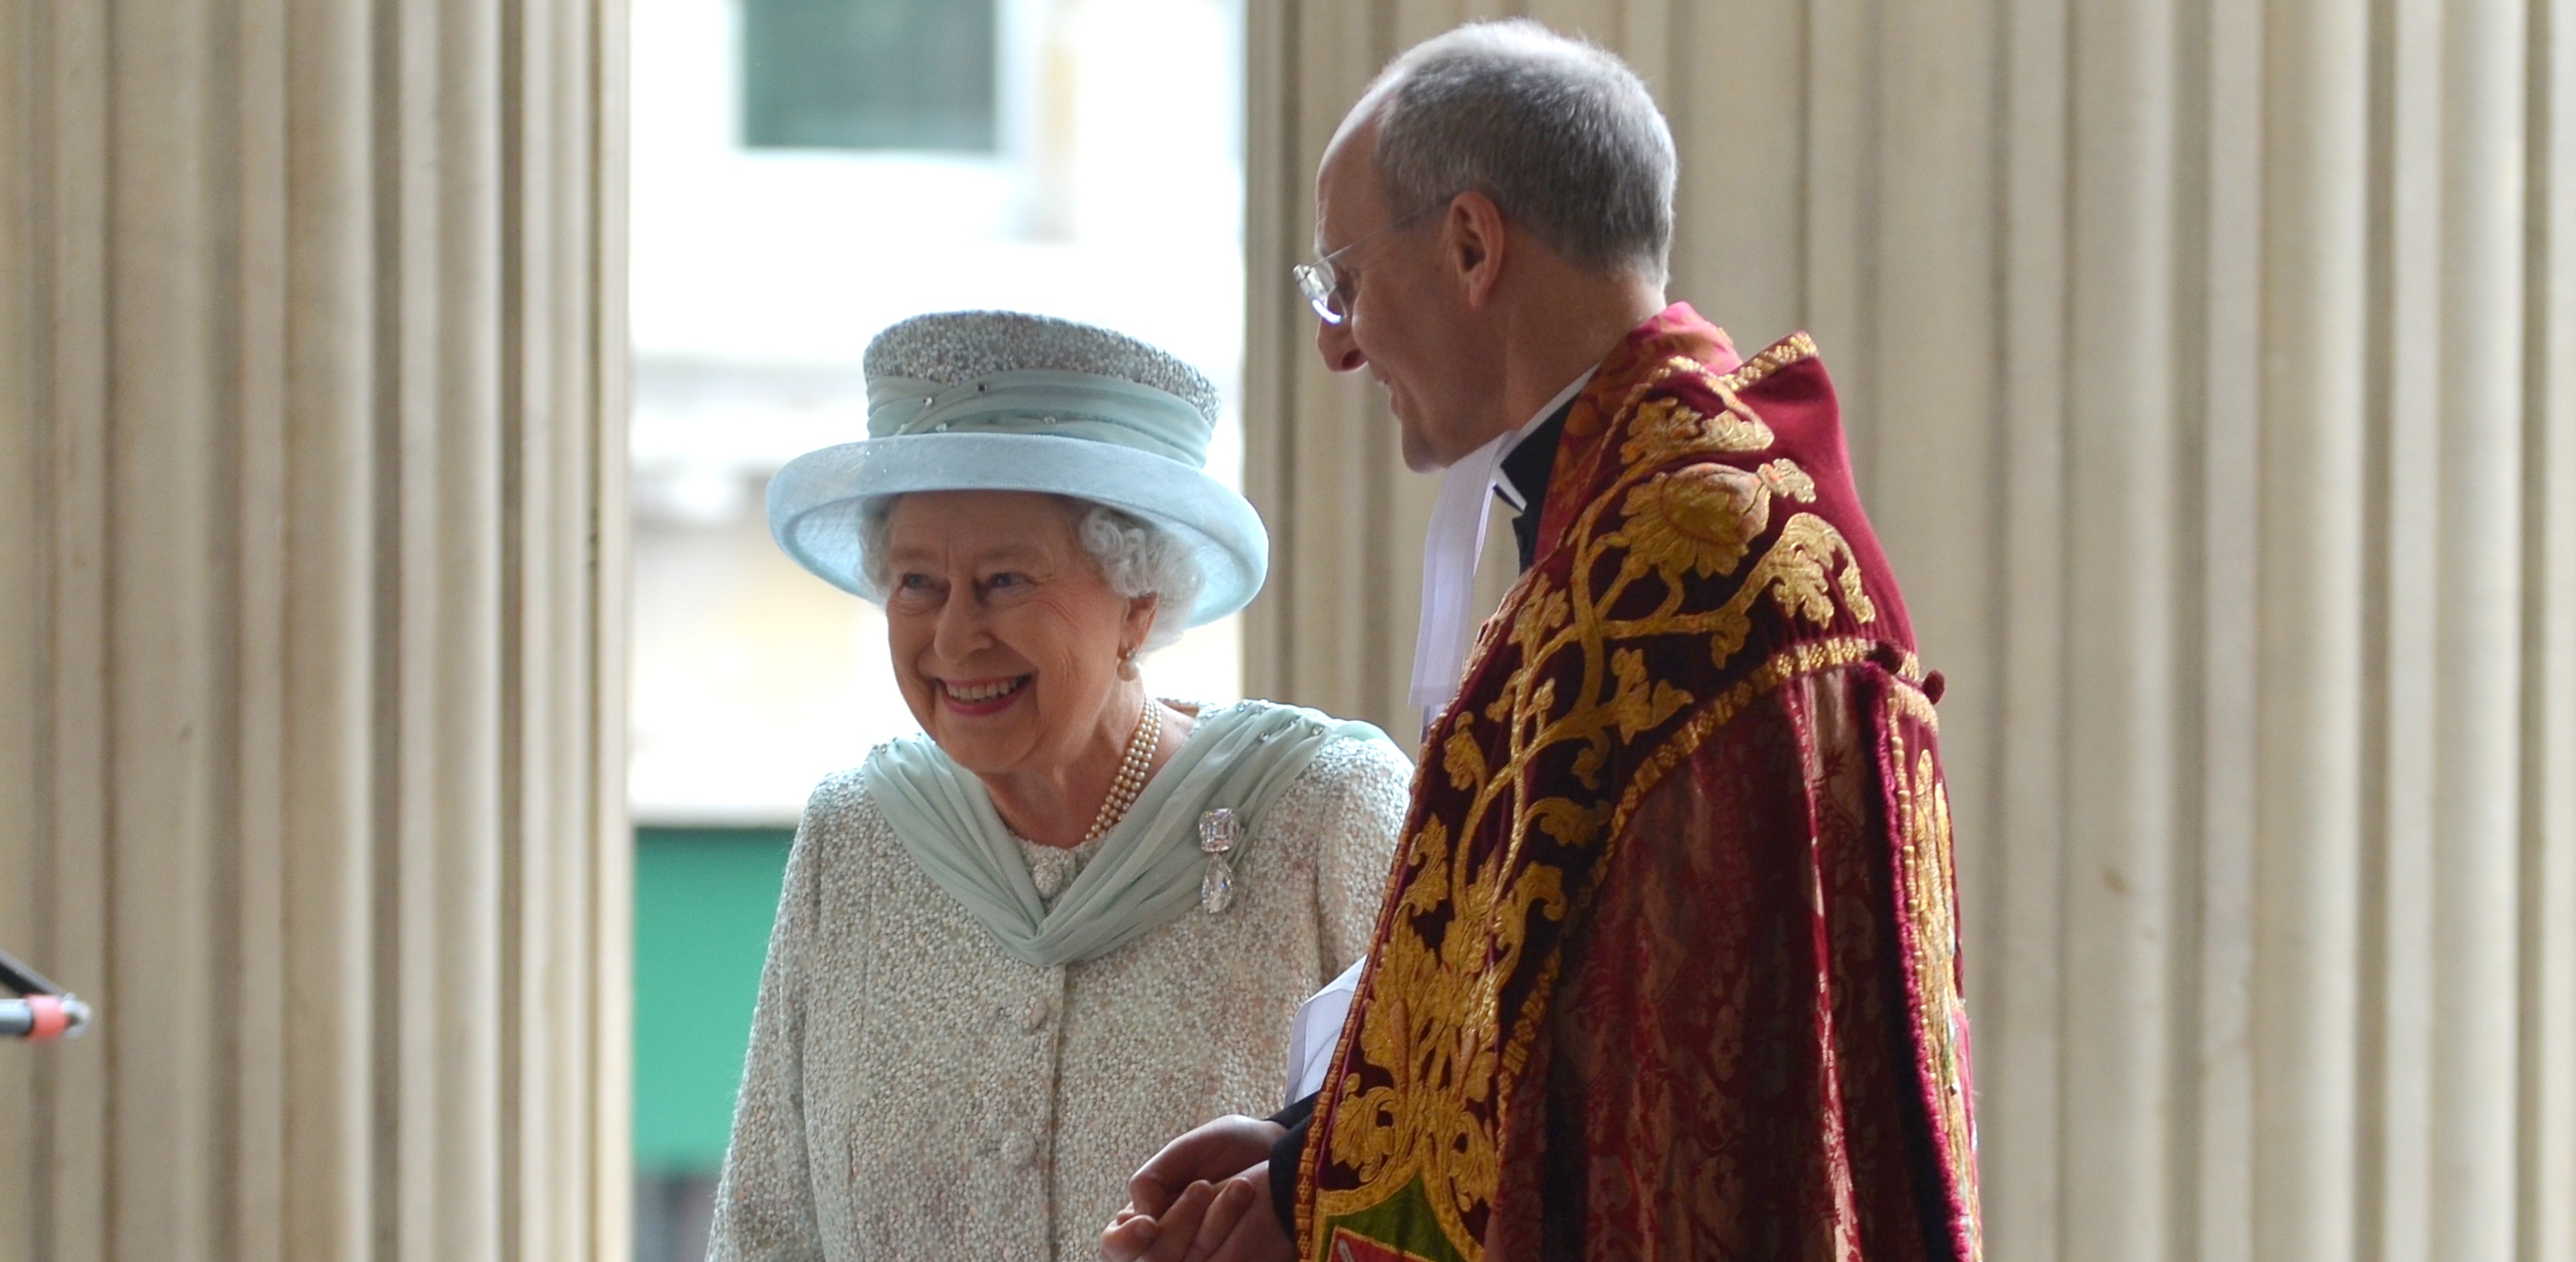 Her Majesty the Queen with the Dean at the entrance to St Paul's Cathedral